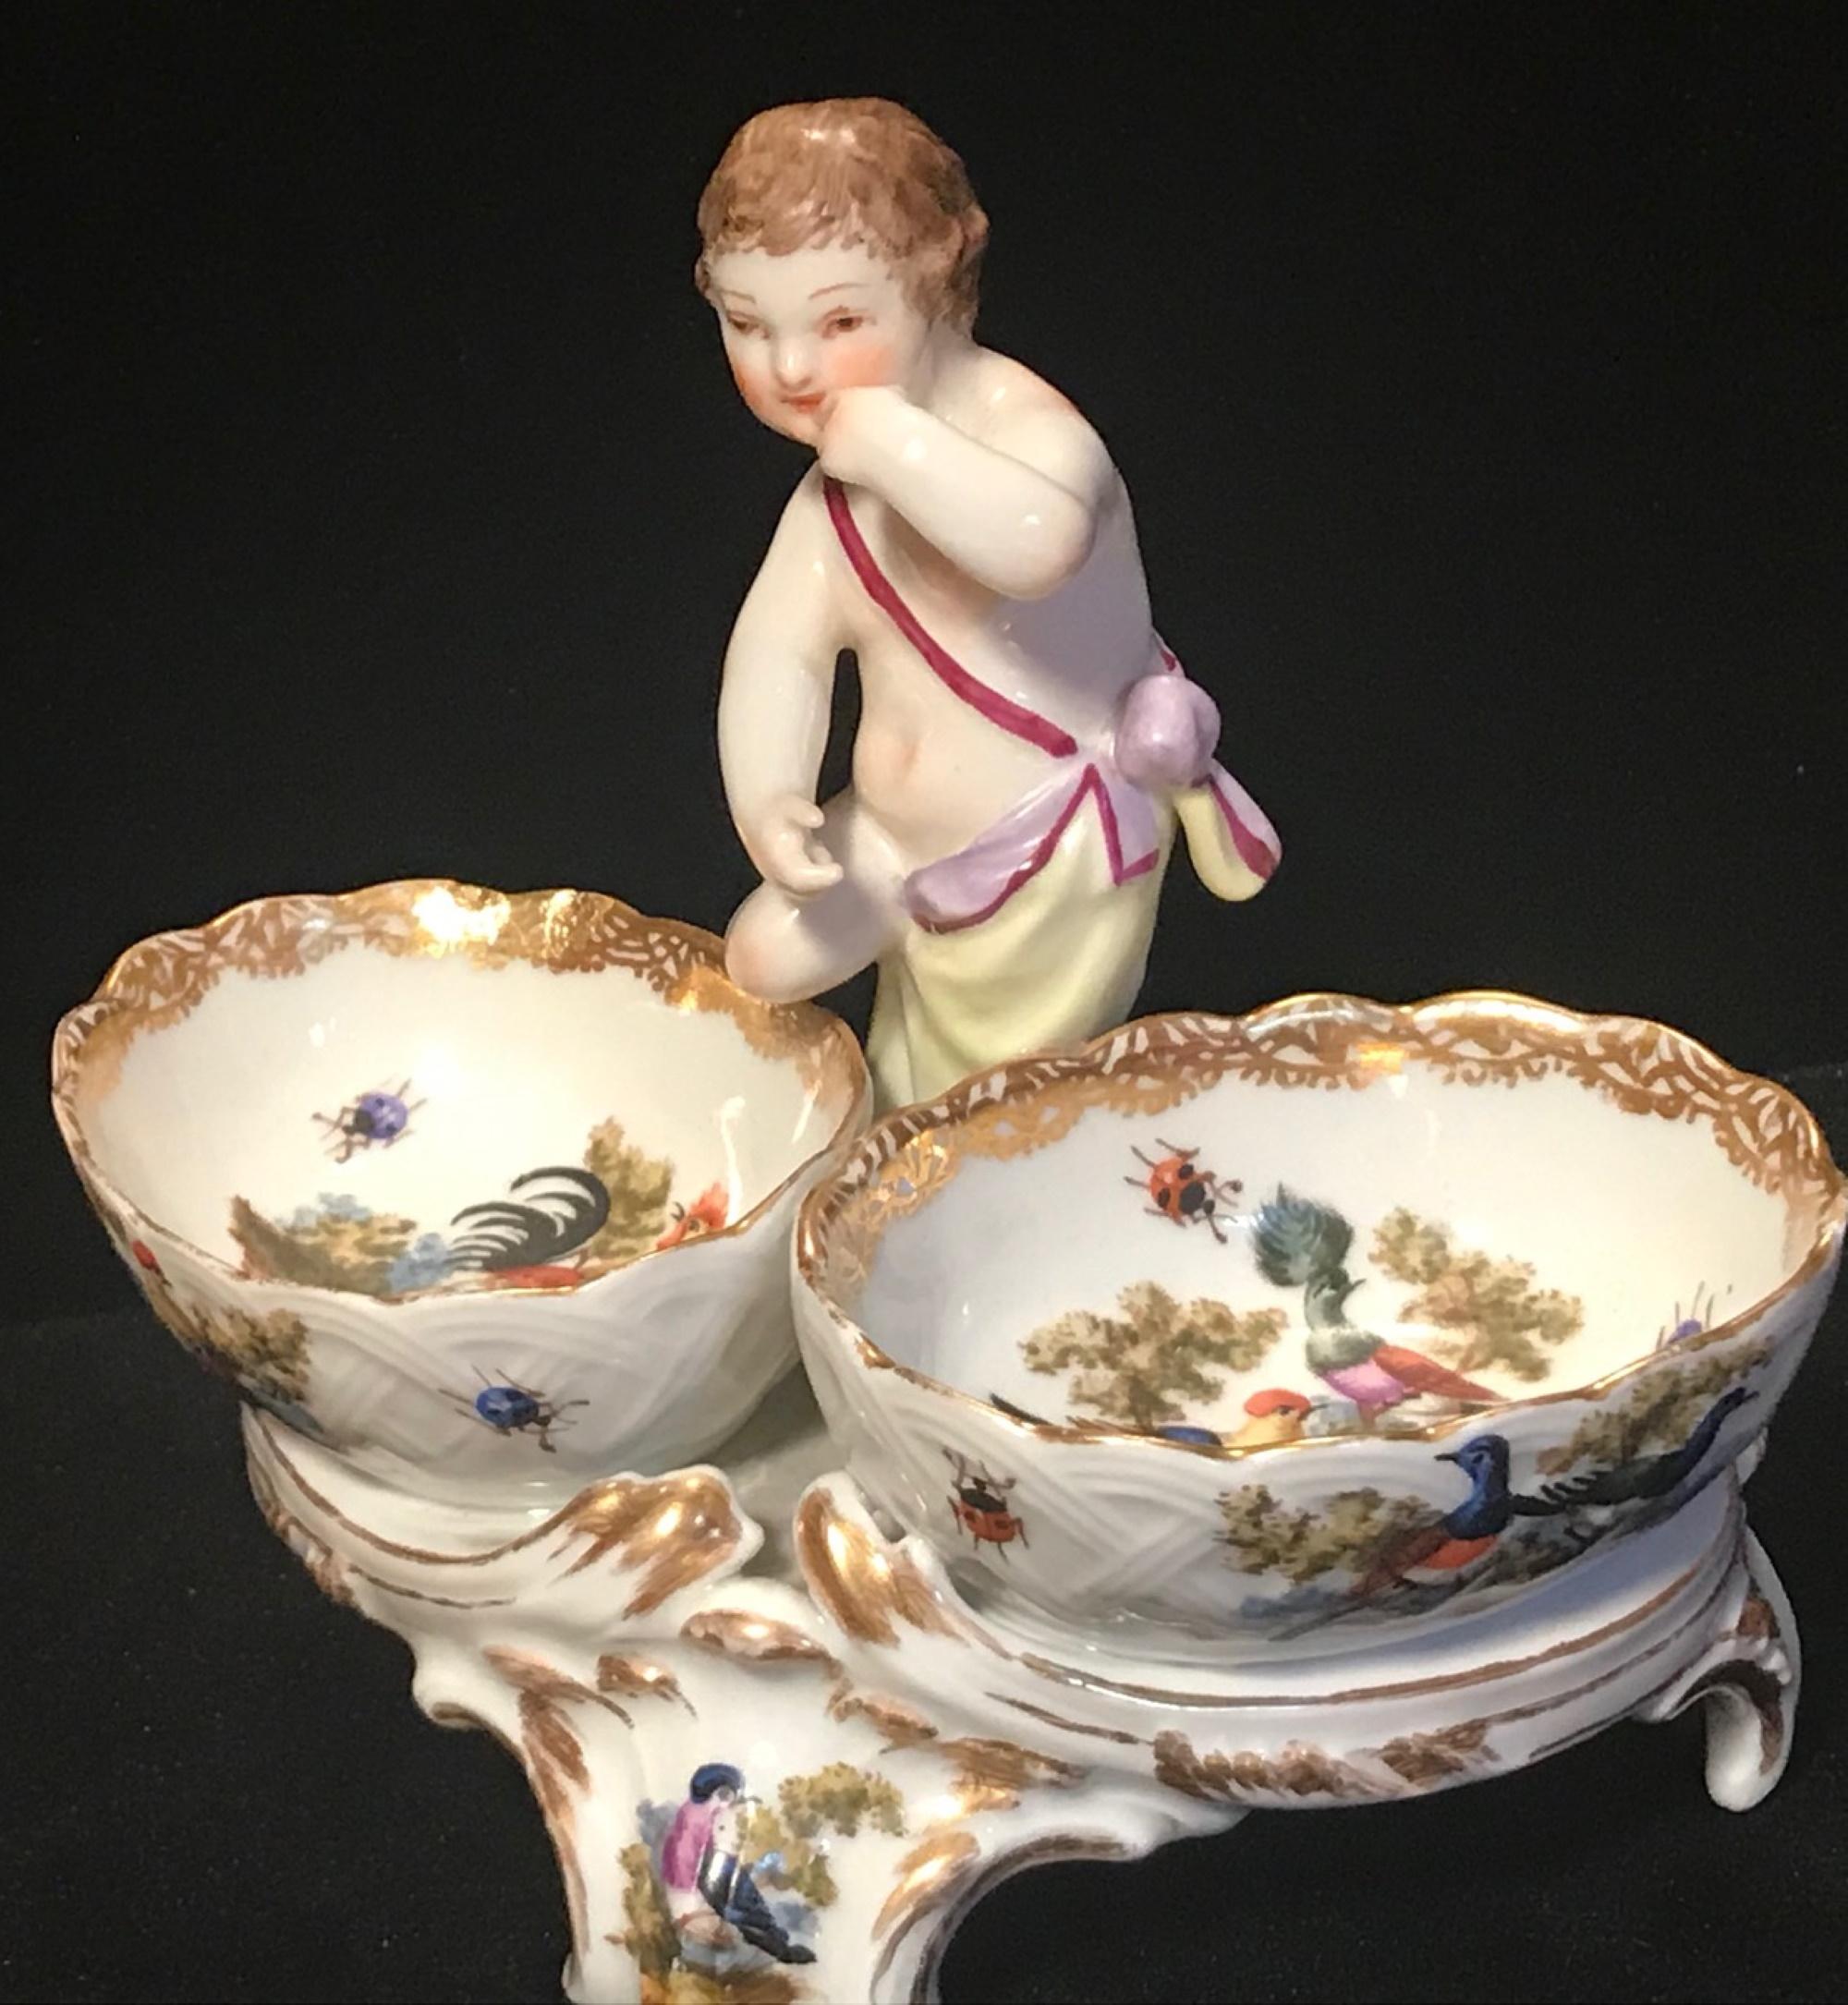 This open salt was made in the 19th century in typical Rococo style. The interior of the salt basin and the stand is delicately painted with birds, flowers and insects. In the center, on top, stands a figure of an gesticulating cherub.